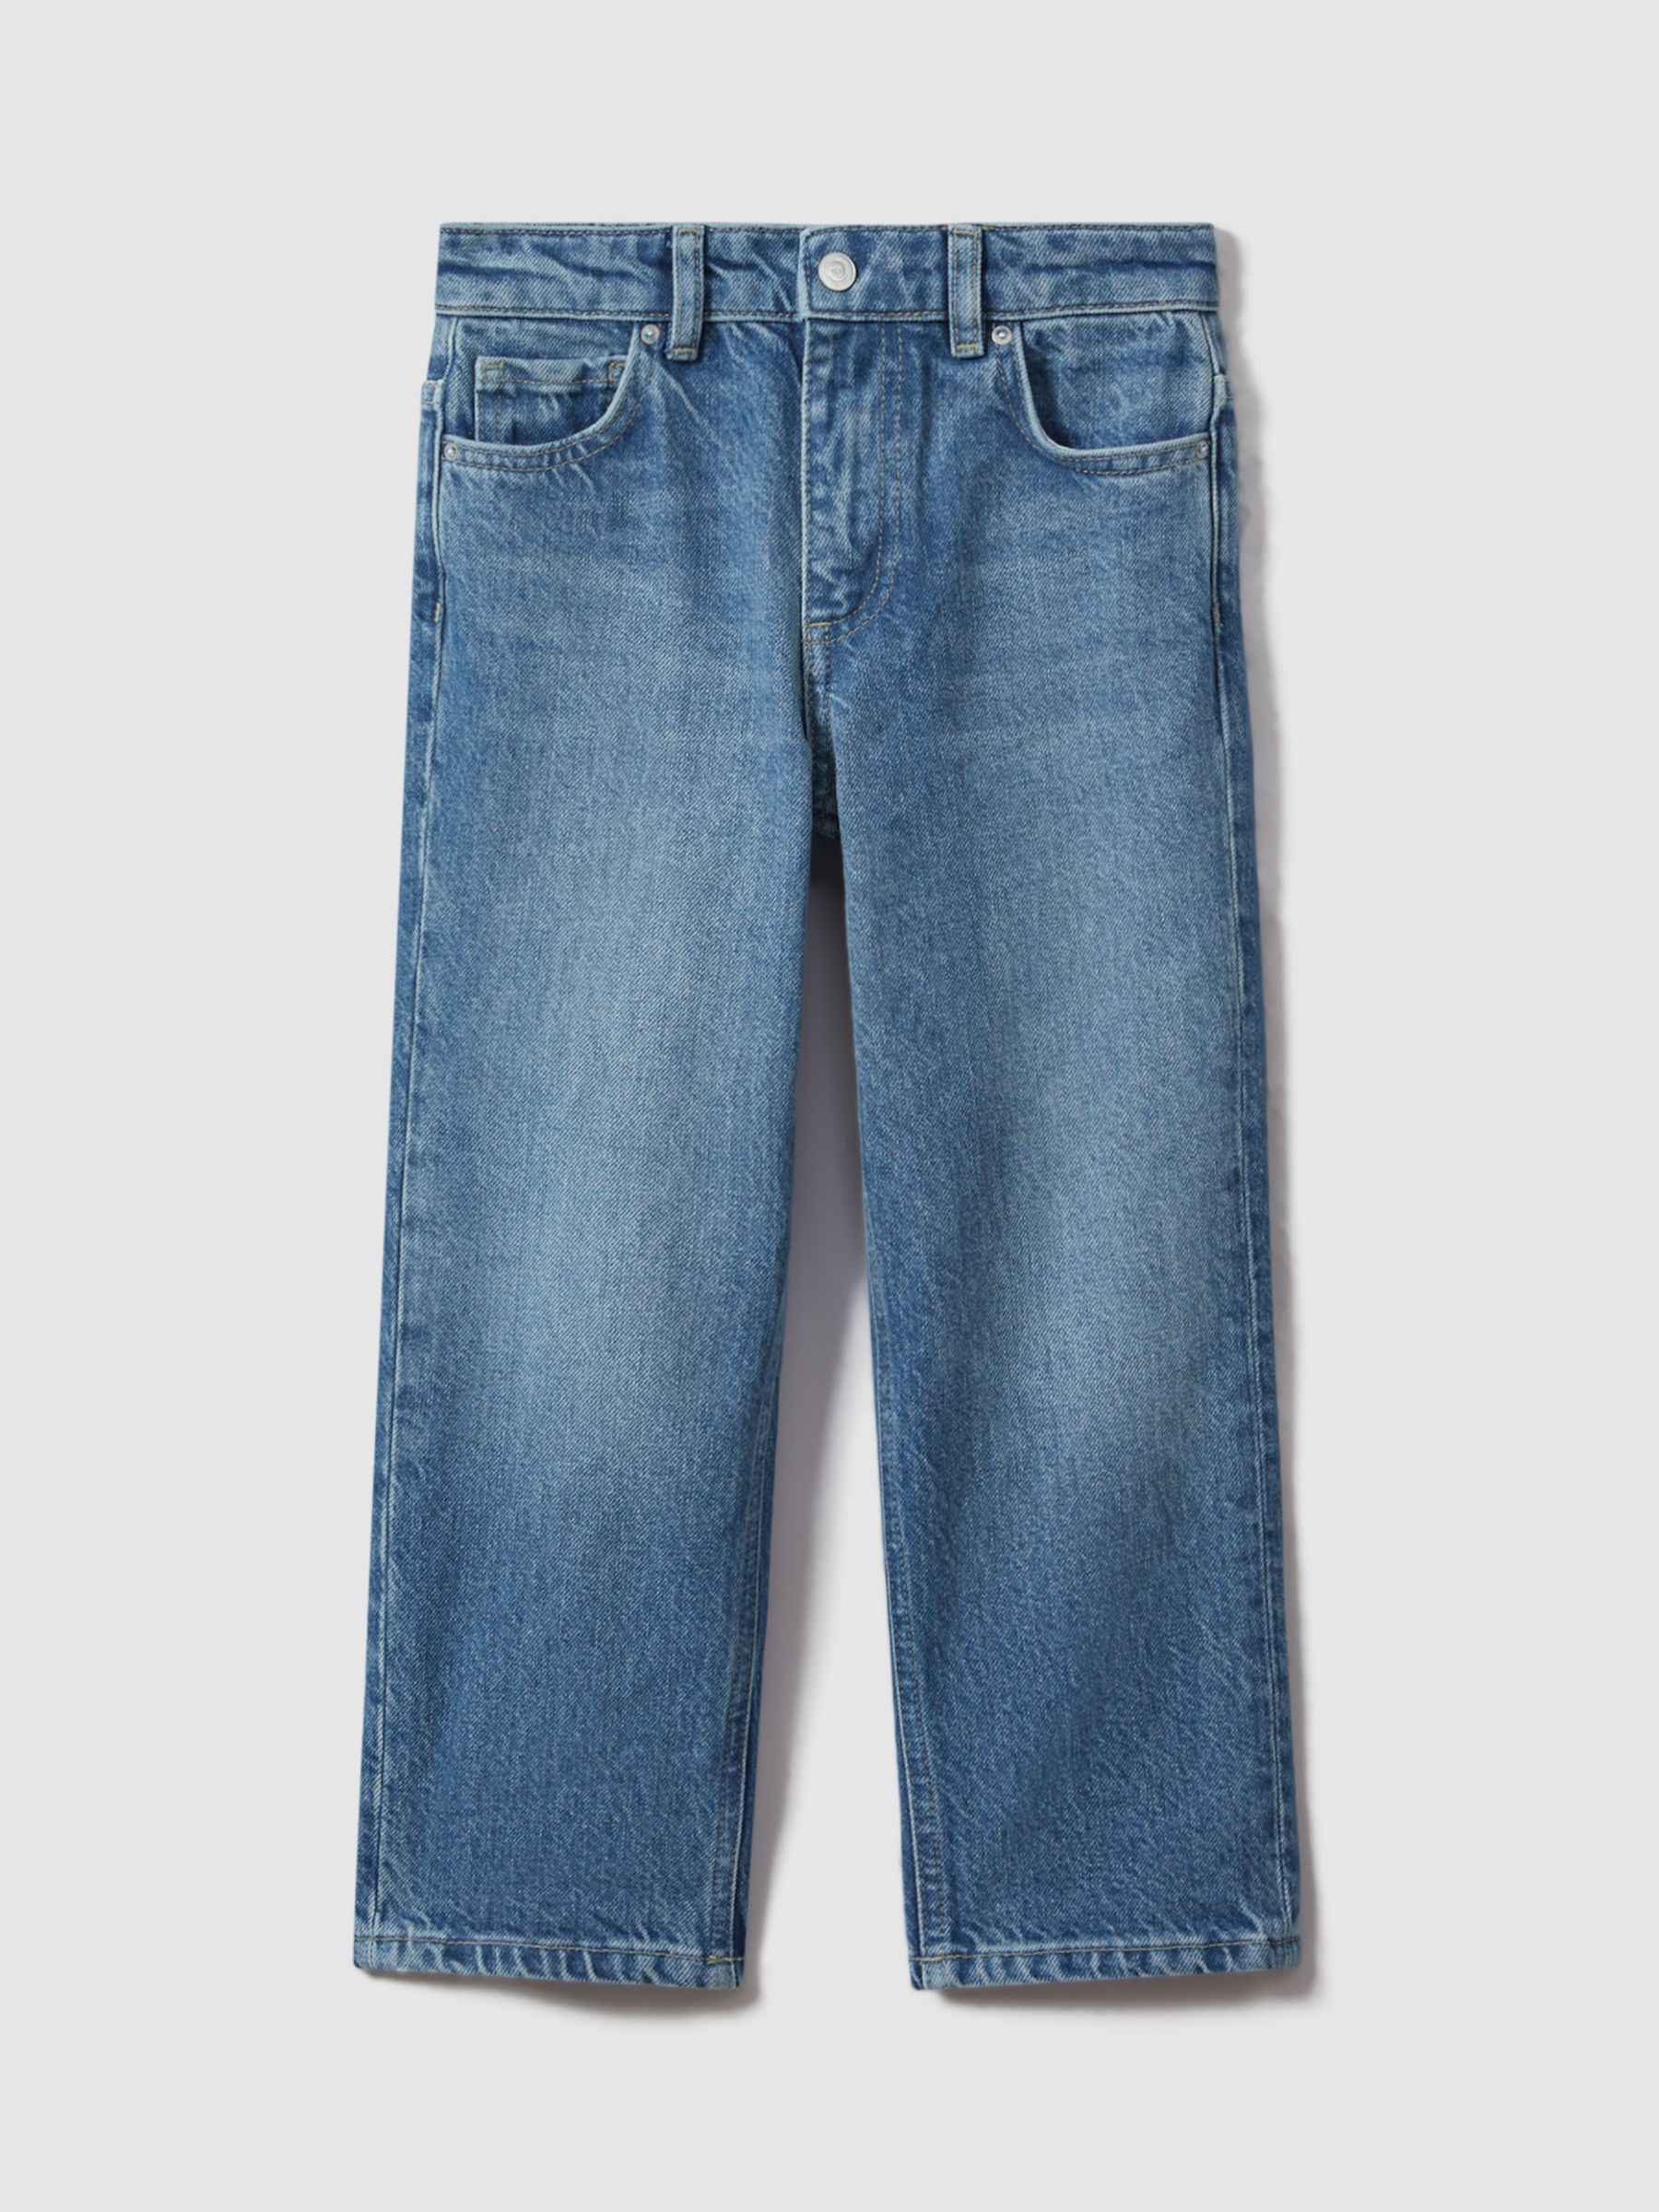 Buy Reiss Kids' Ronnie Loose Fit Jeans, Mid Blue Online at johnlewis.com